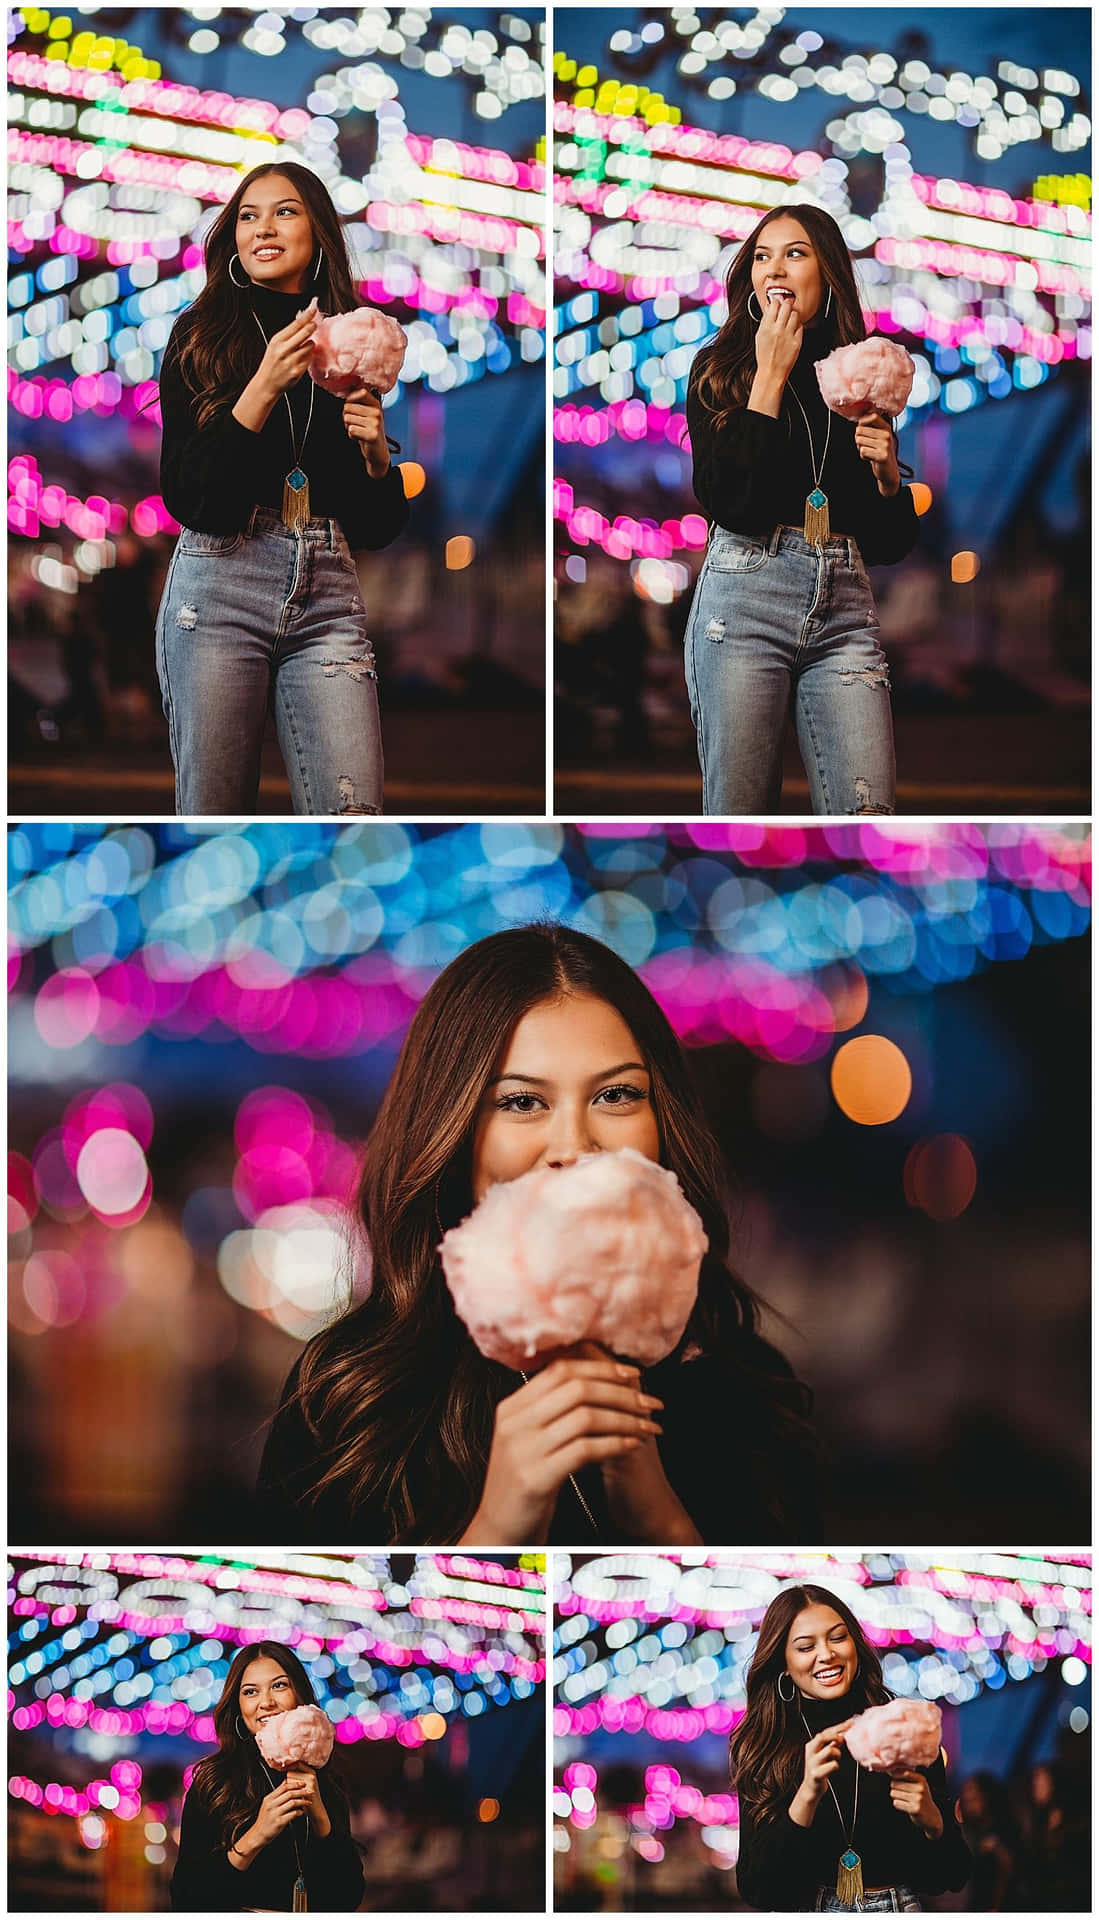 Girl Holding Cotton Candy At Carnival Collage Picture